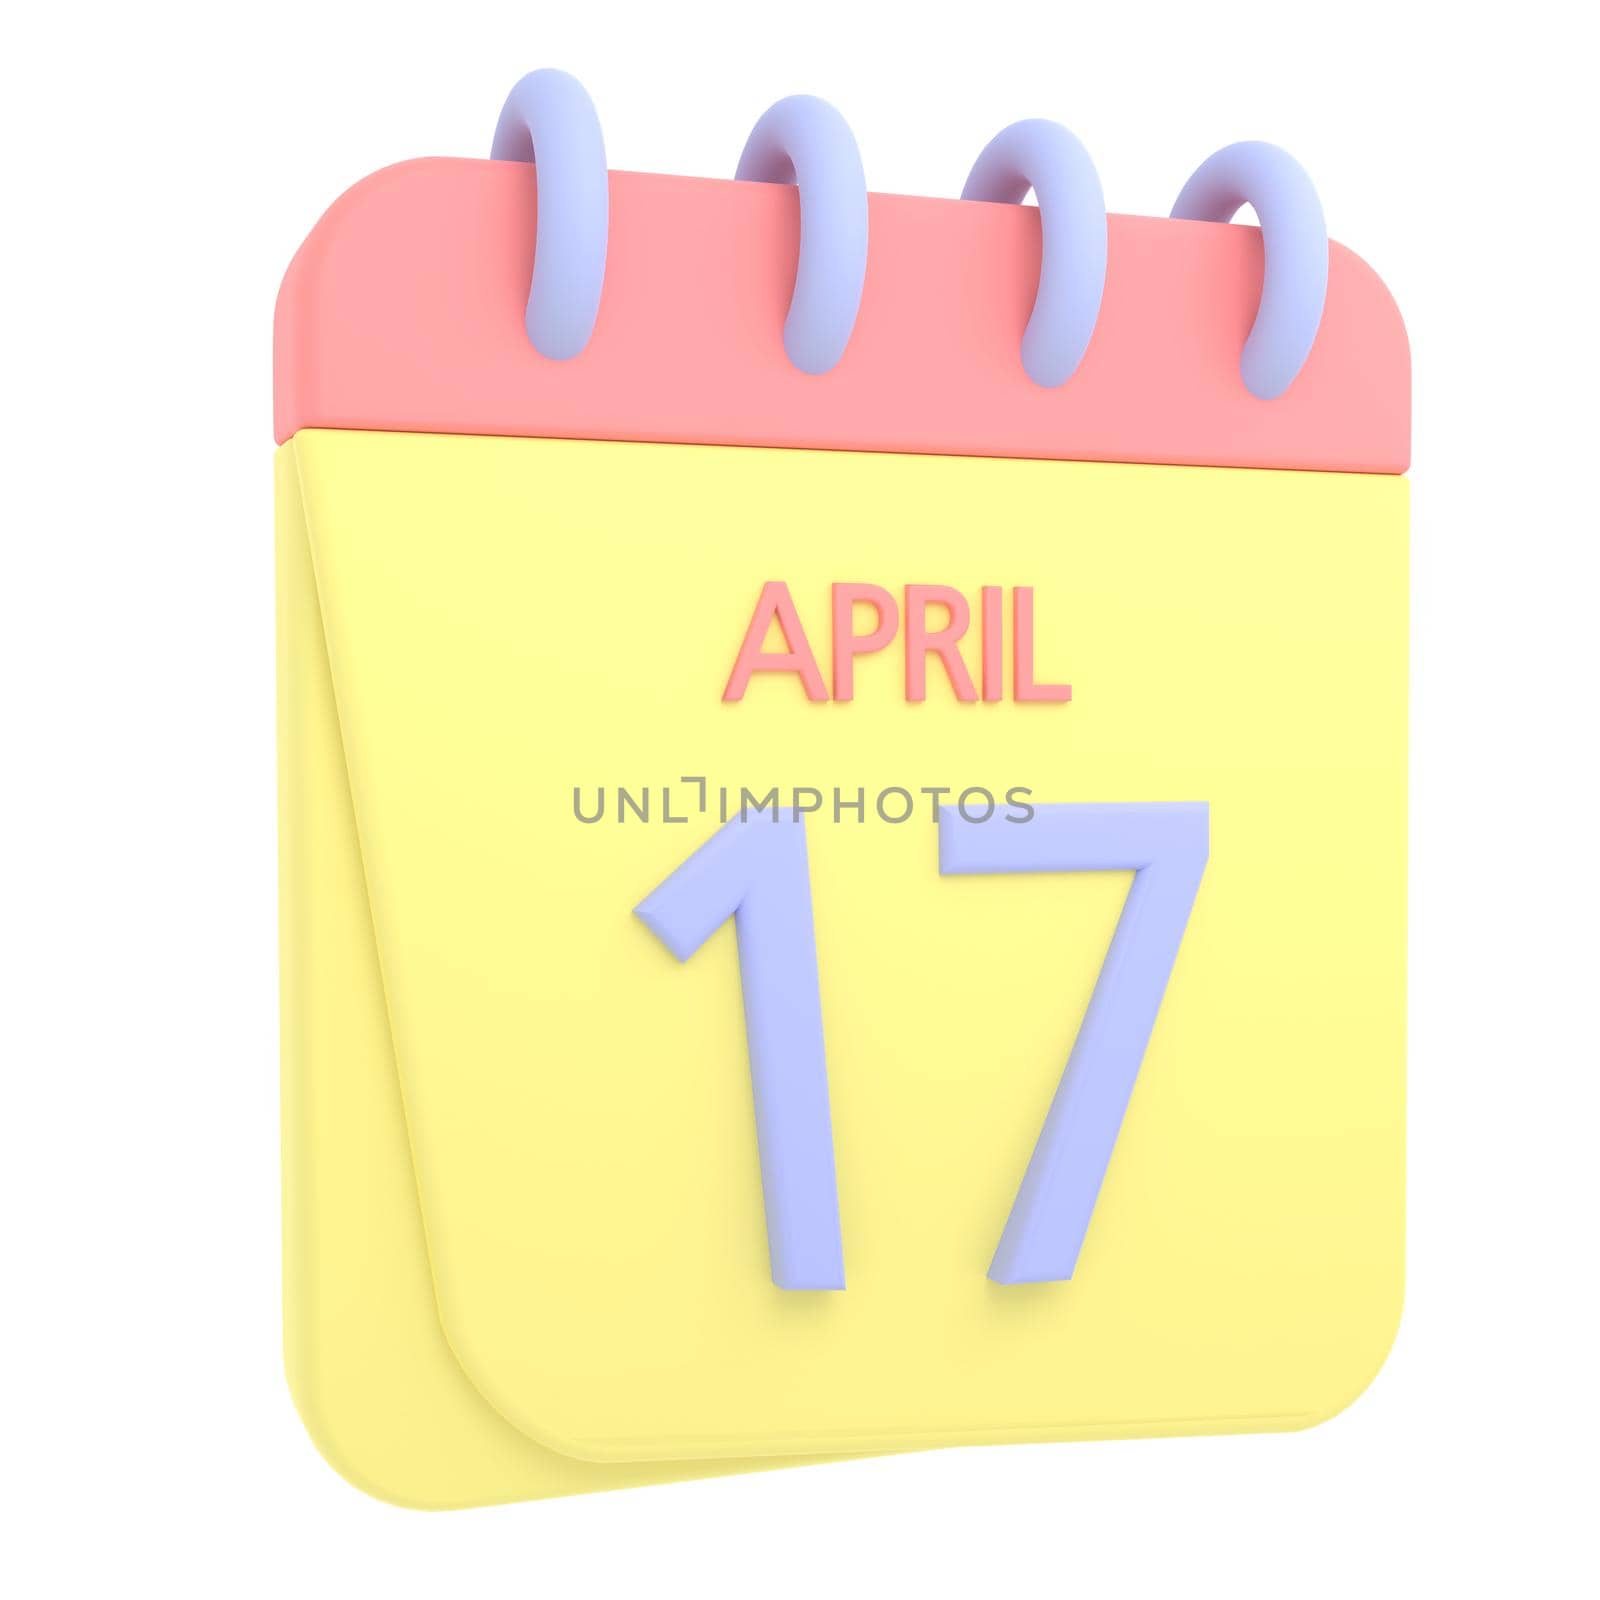 17th April 3D calendar icon. Web style. High resolution image. White background